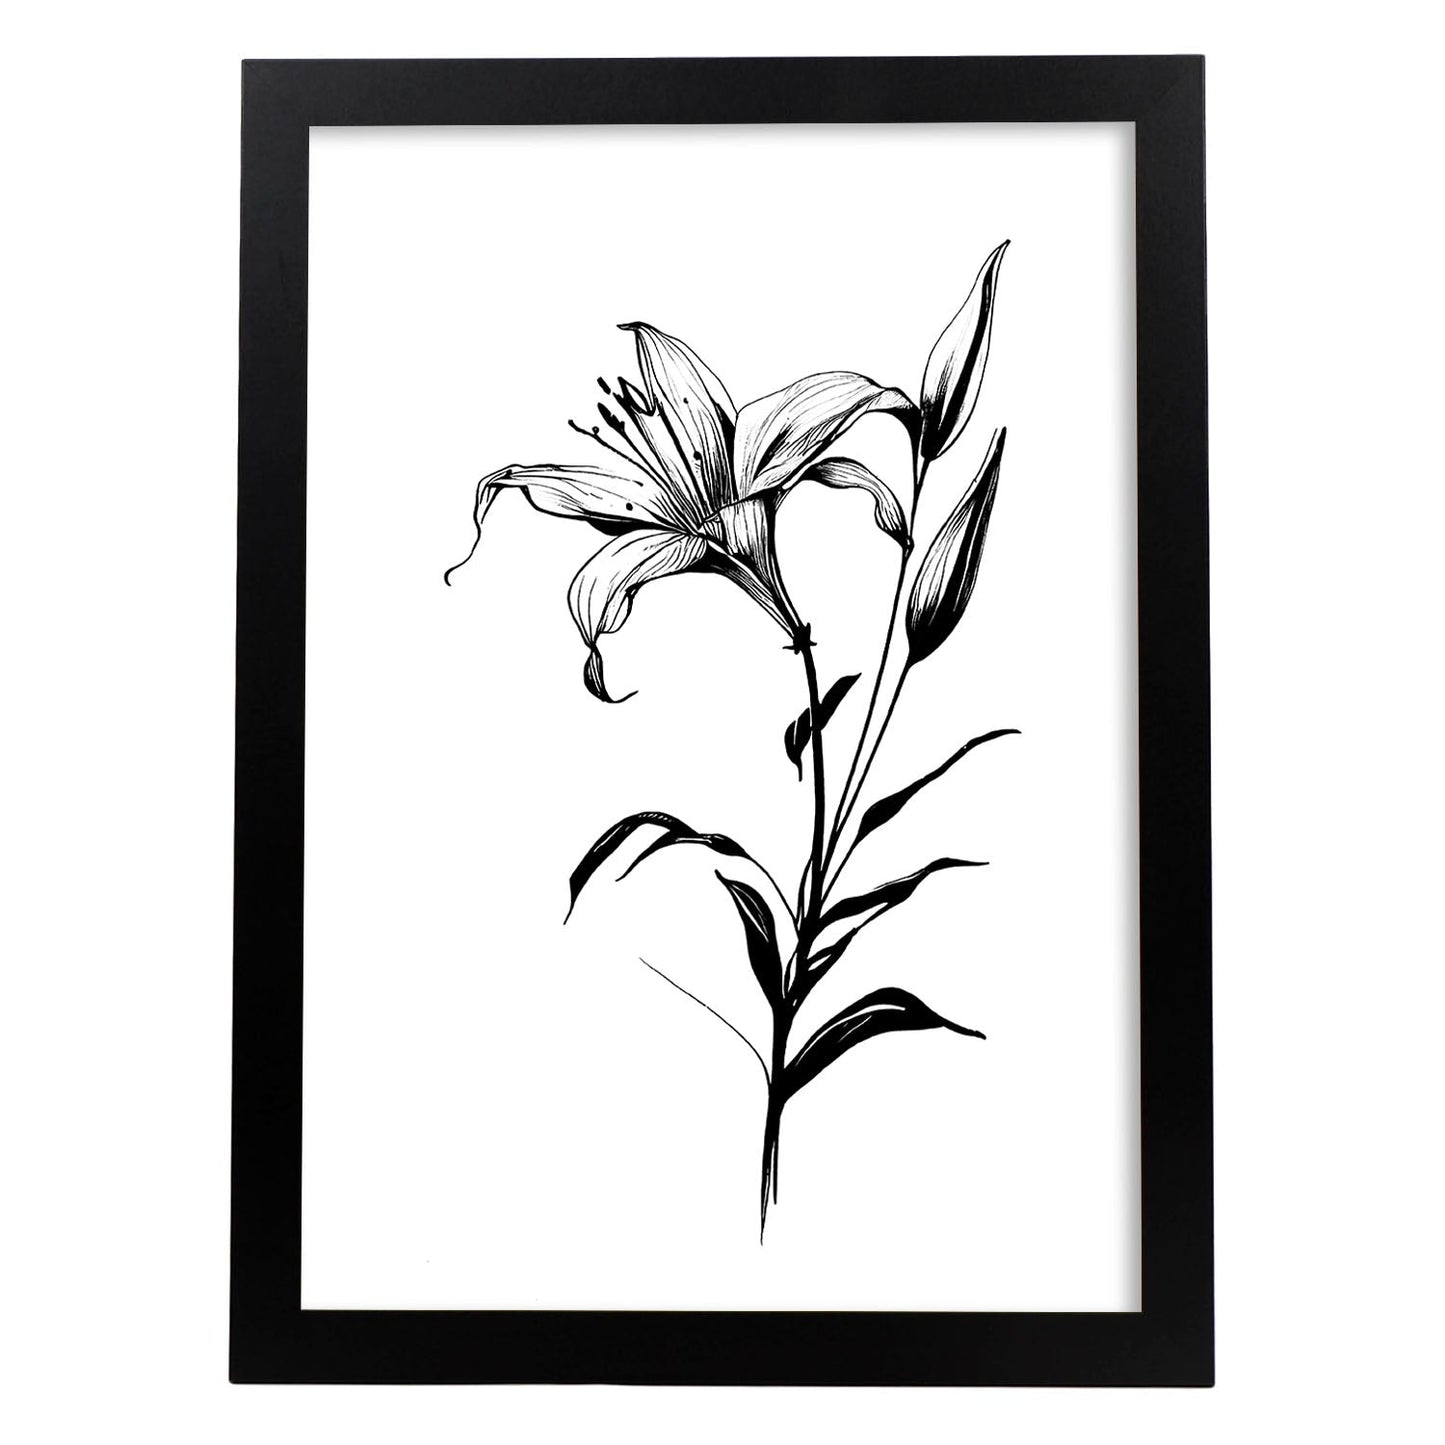 Nacnic Lily Minimalist Line Art_2. Aesthetic Wall Art Prints for Bedroom or Living Room Design.